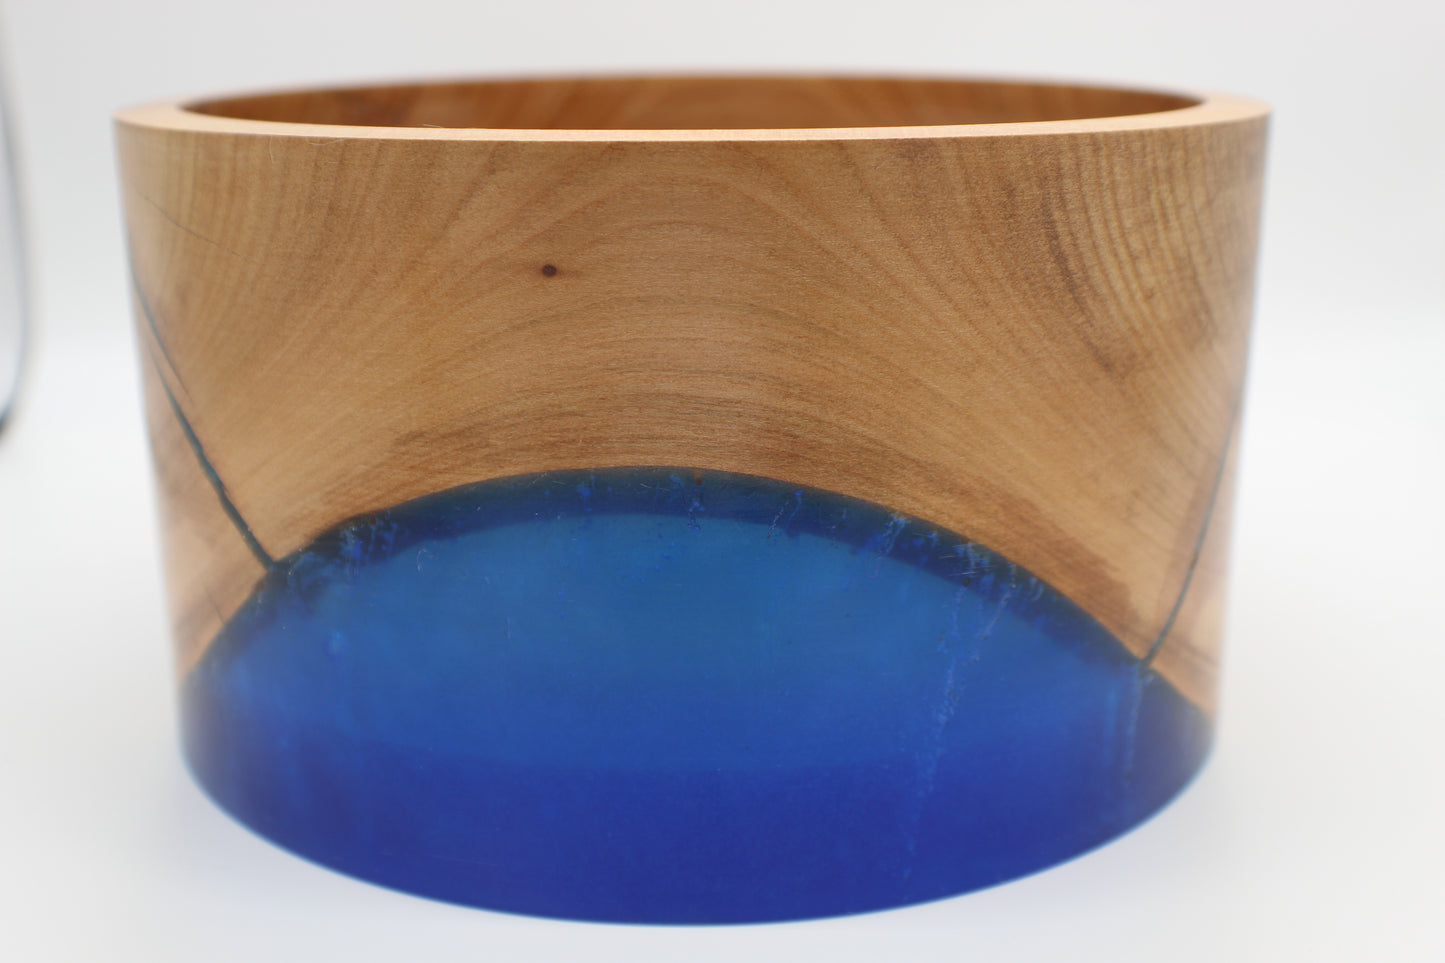 Cherry Bowl with Blue resin inlay